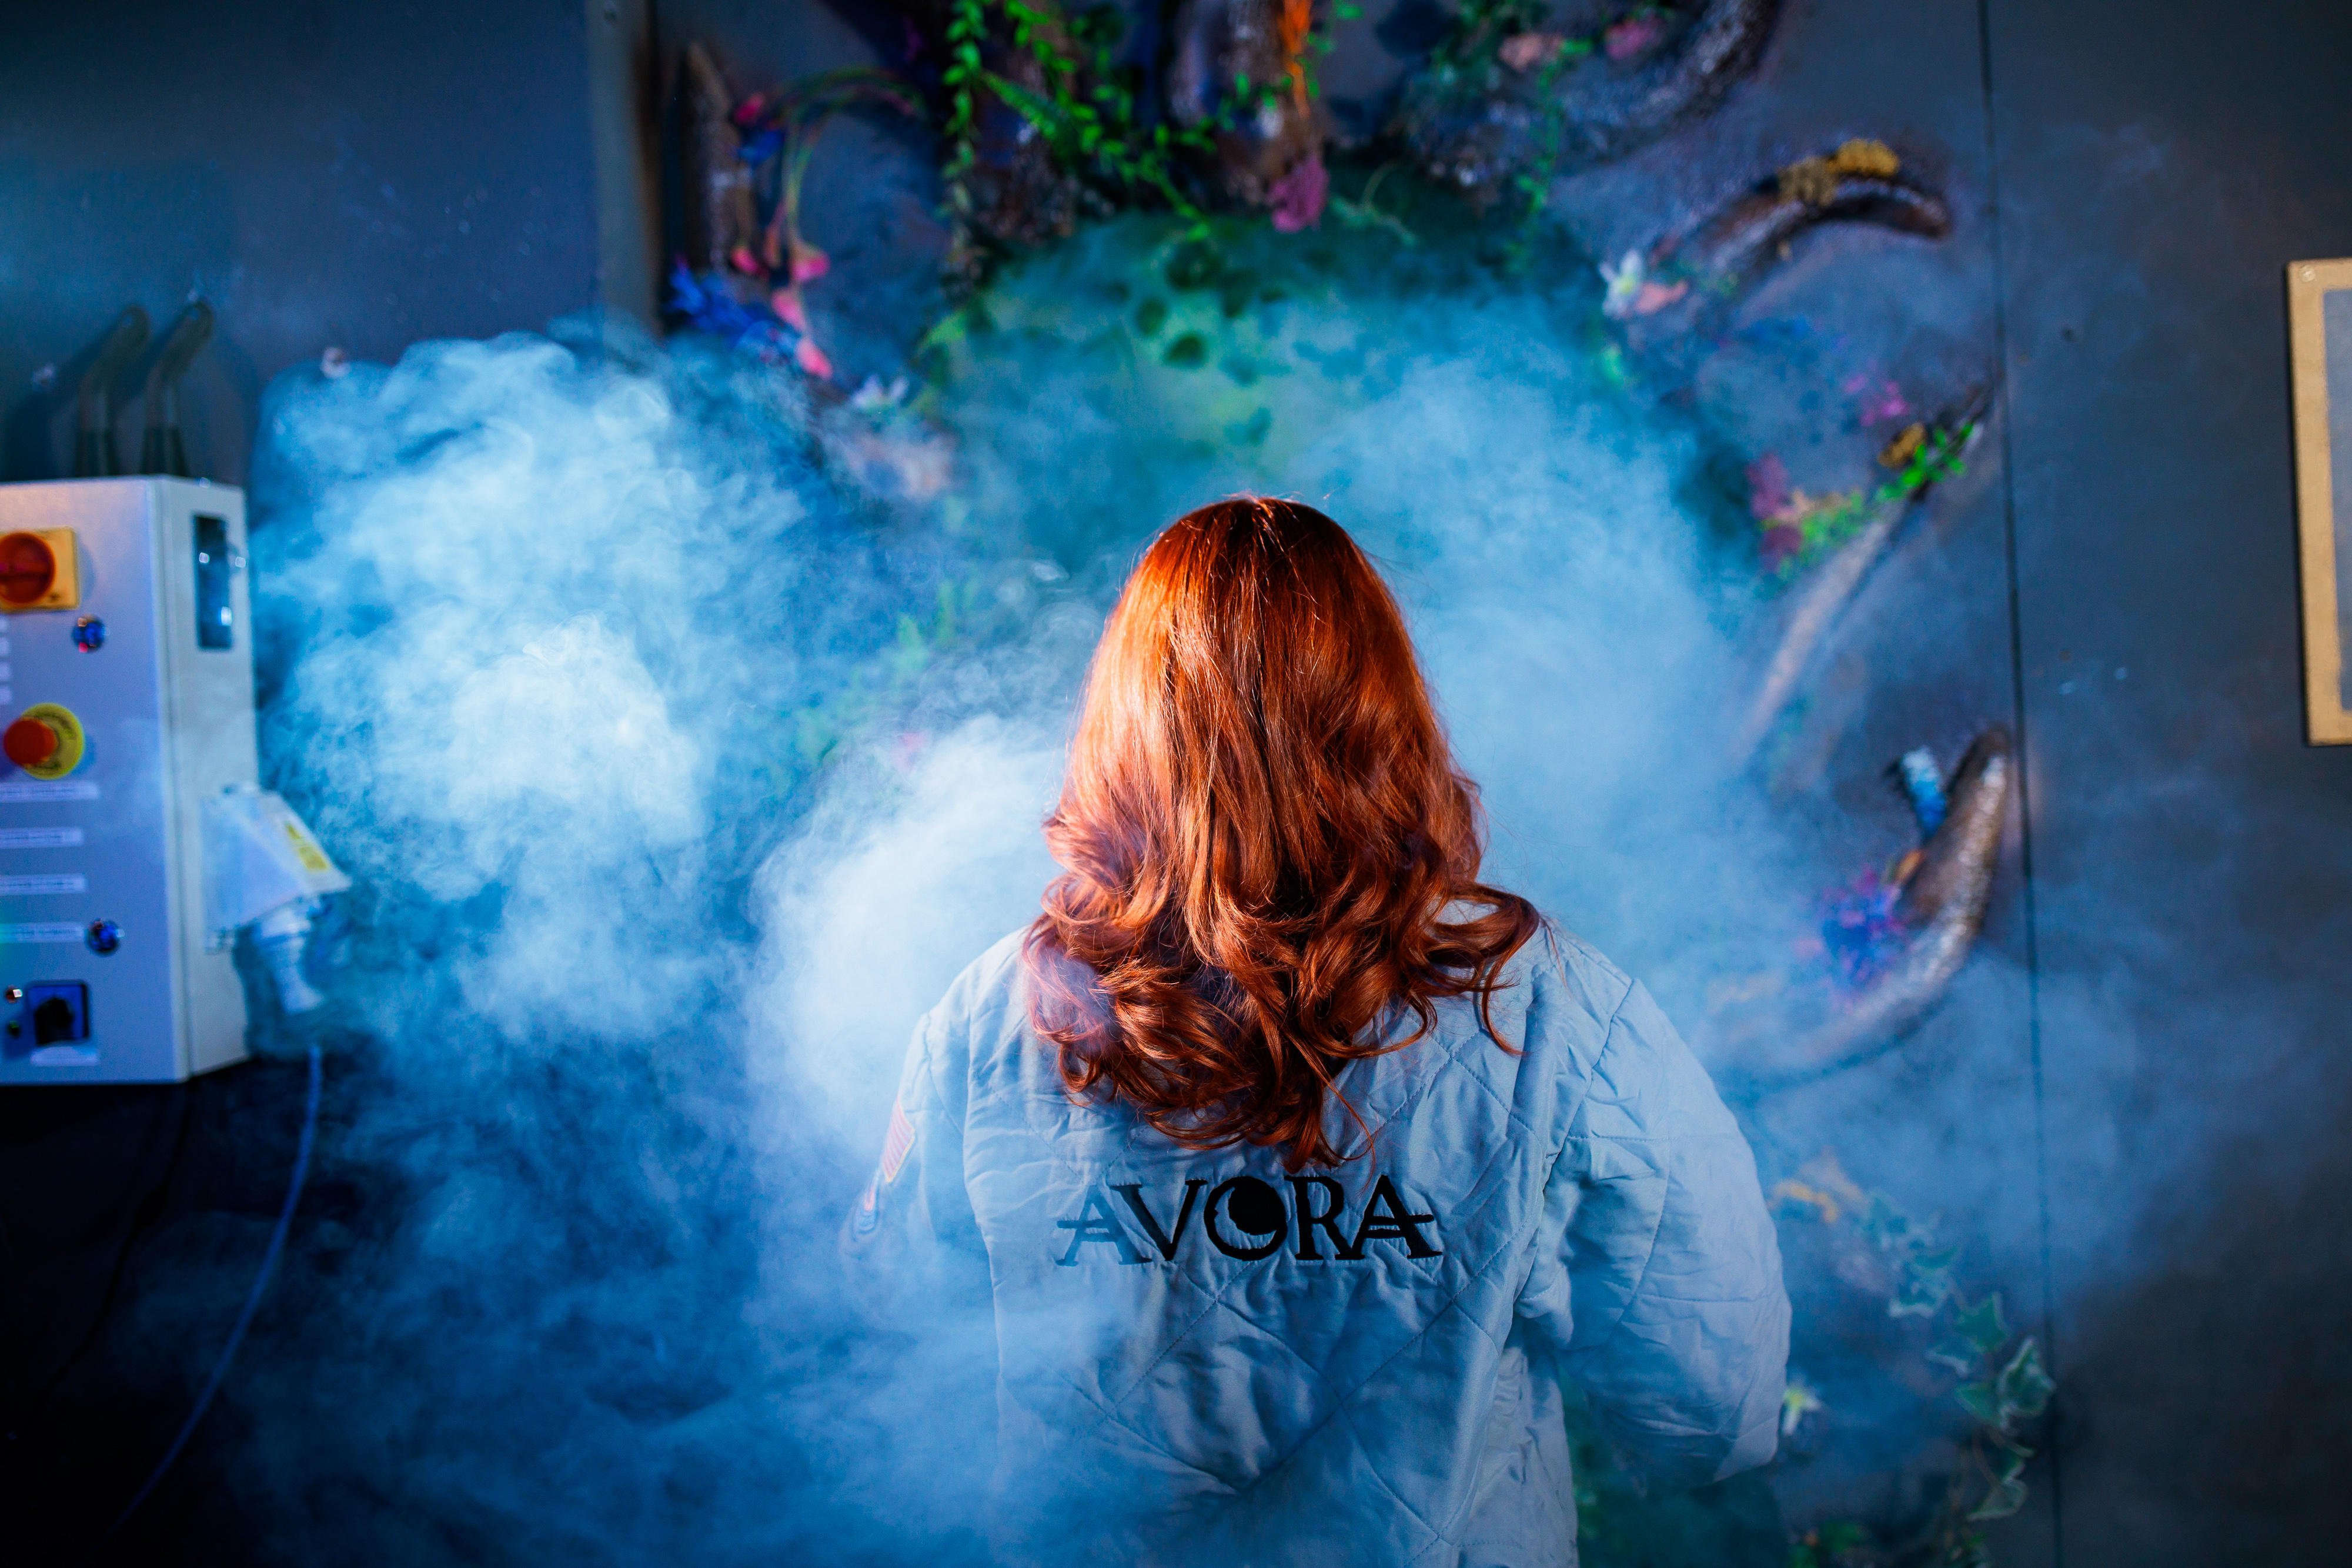 Images Avora London: A New-World Cocktail Experience